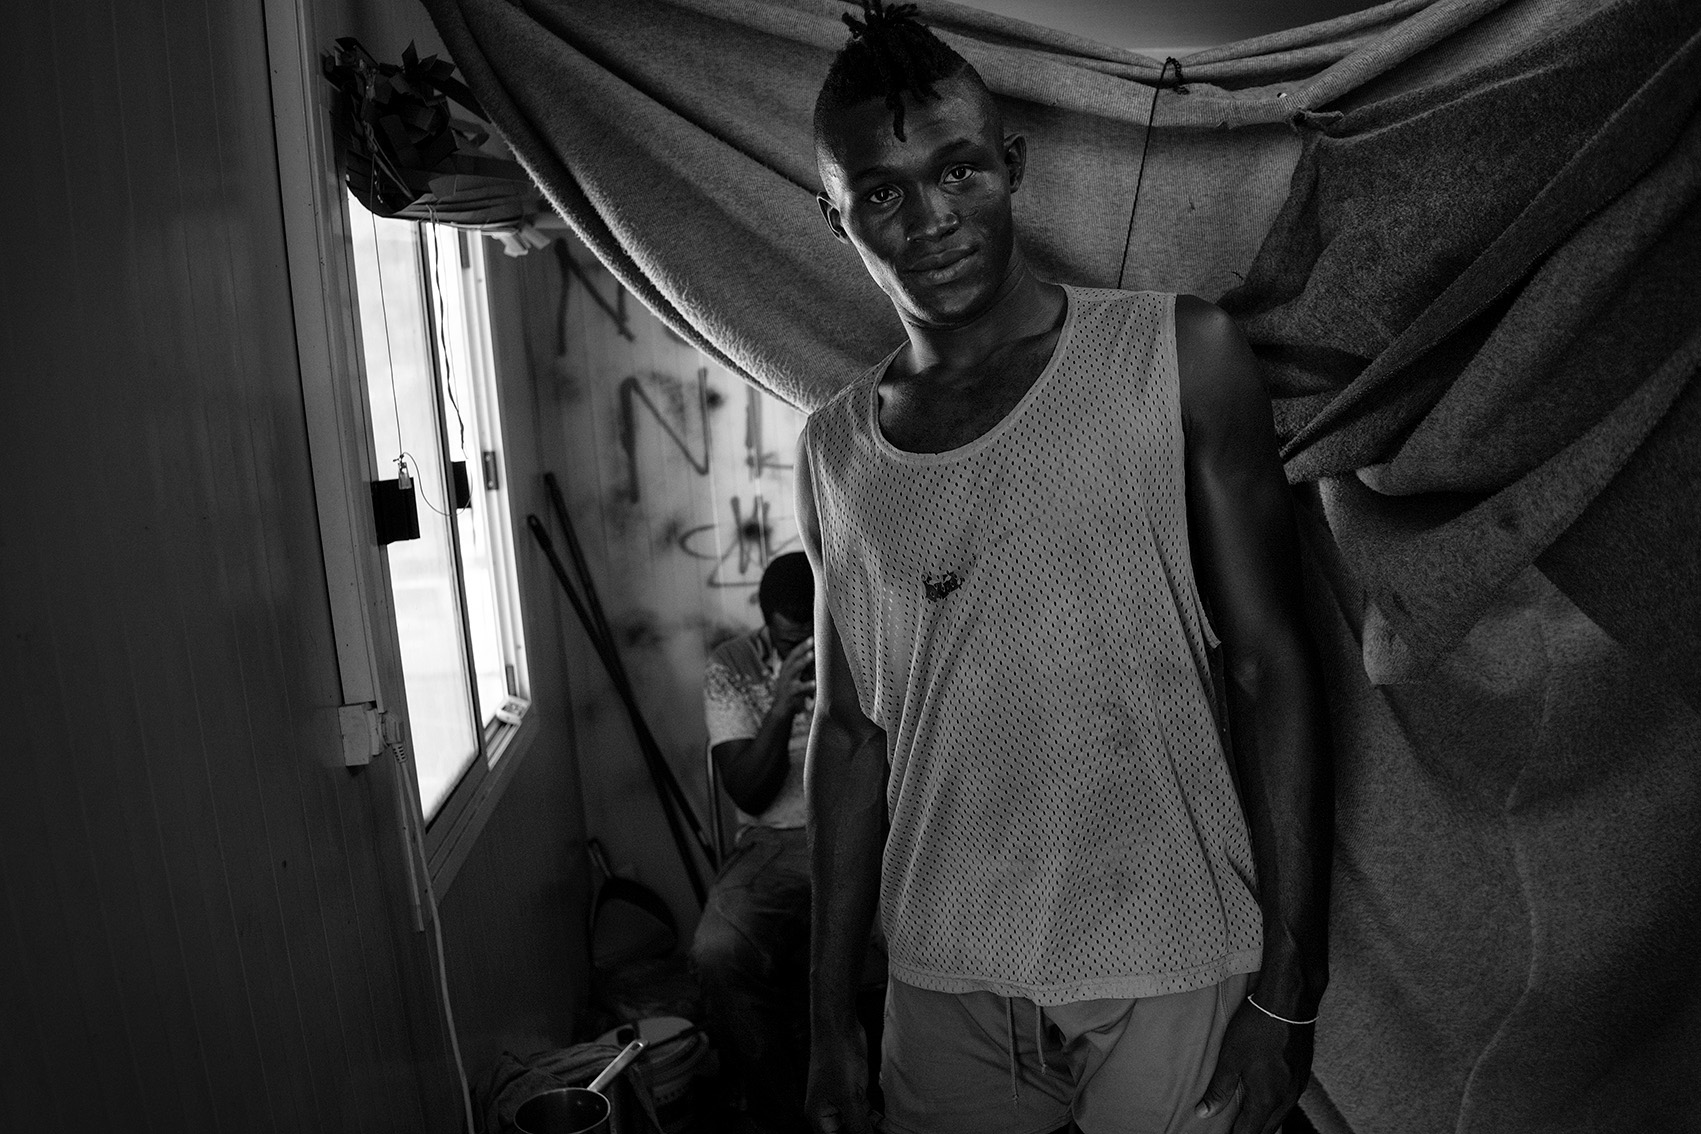 Ali, a professional football player from Guinee, inside his container at the refugee camp Moria. He lives together with 4 other refugees from Africa, their beds divided by blankets, Lesvos, Greece.